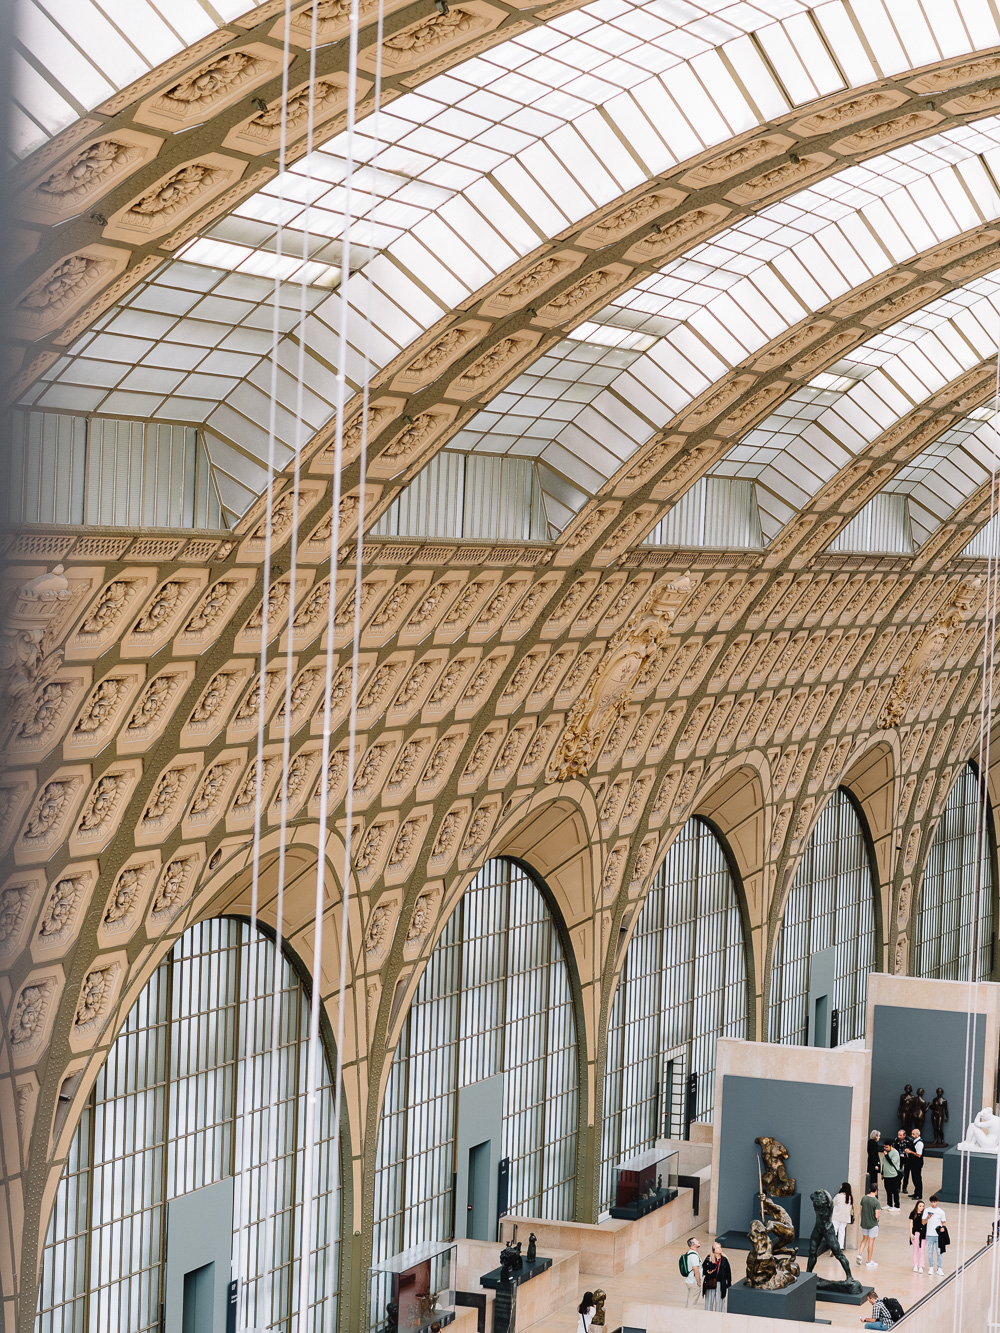 Practical tips for a visit to the Musée d'Orsay